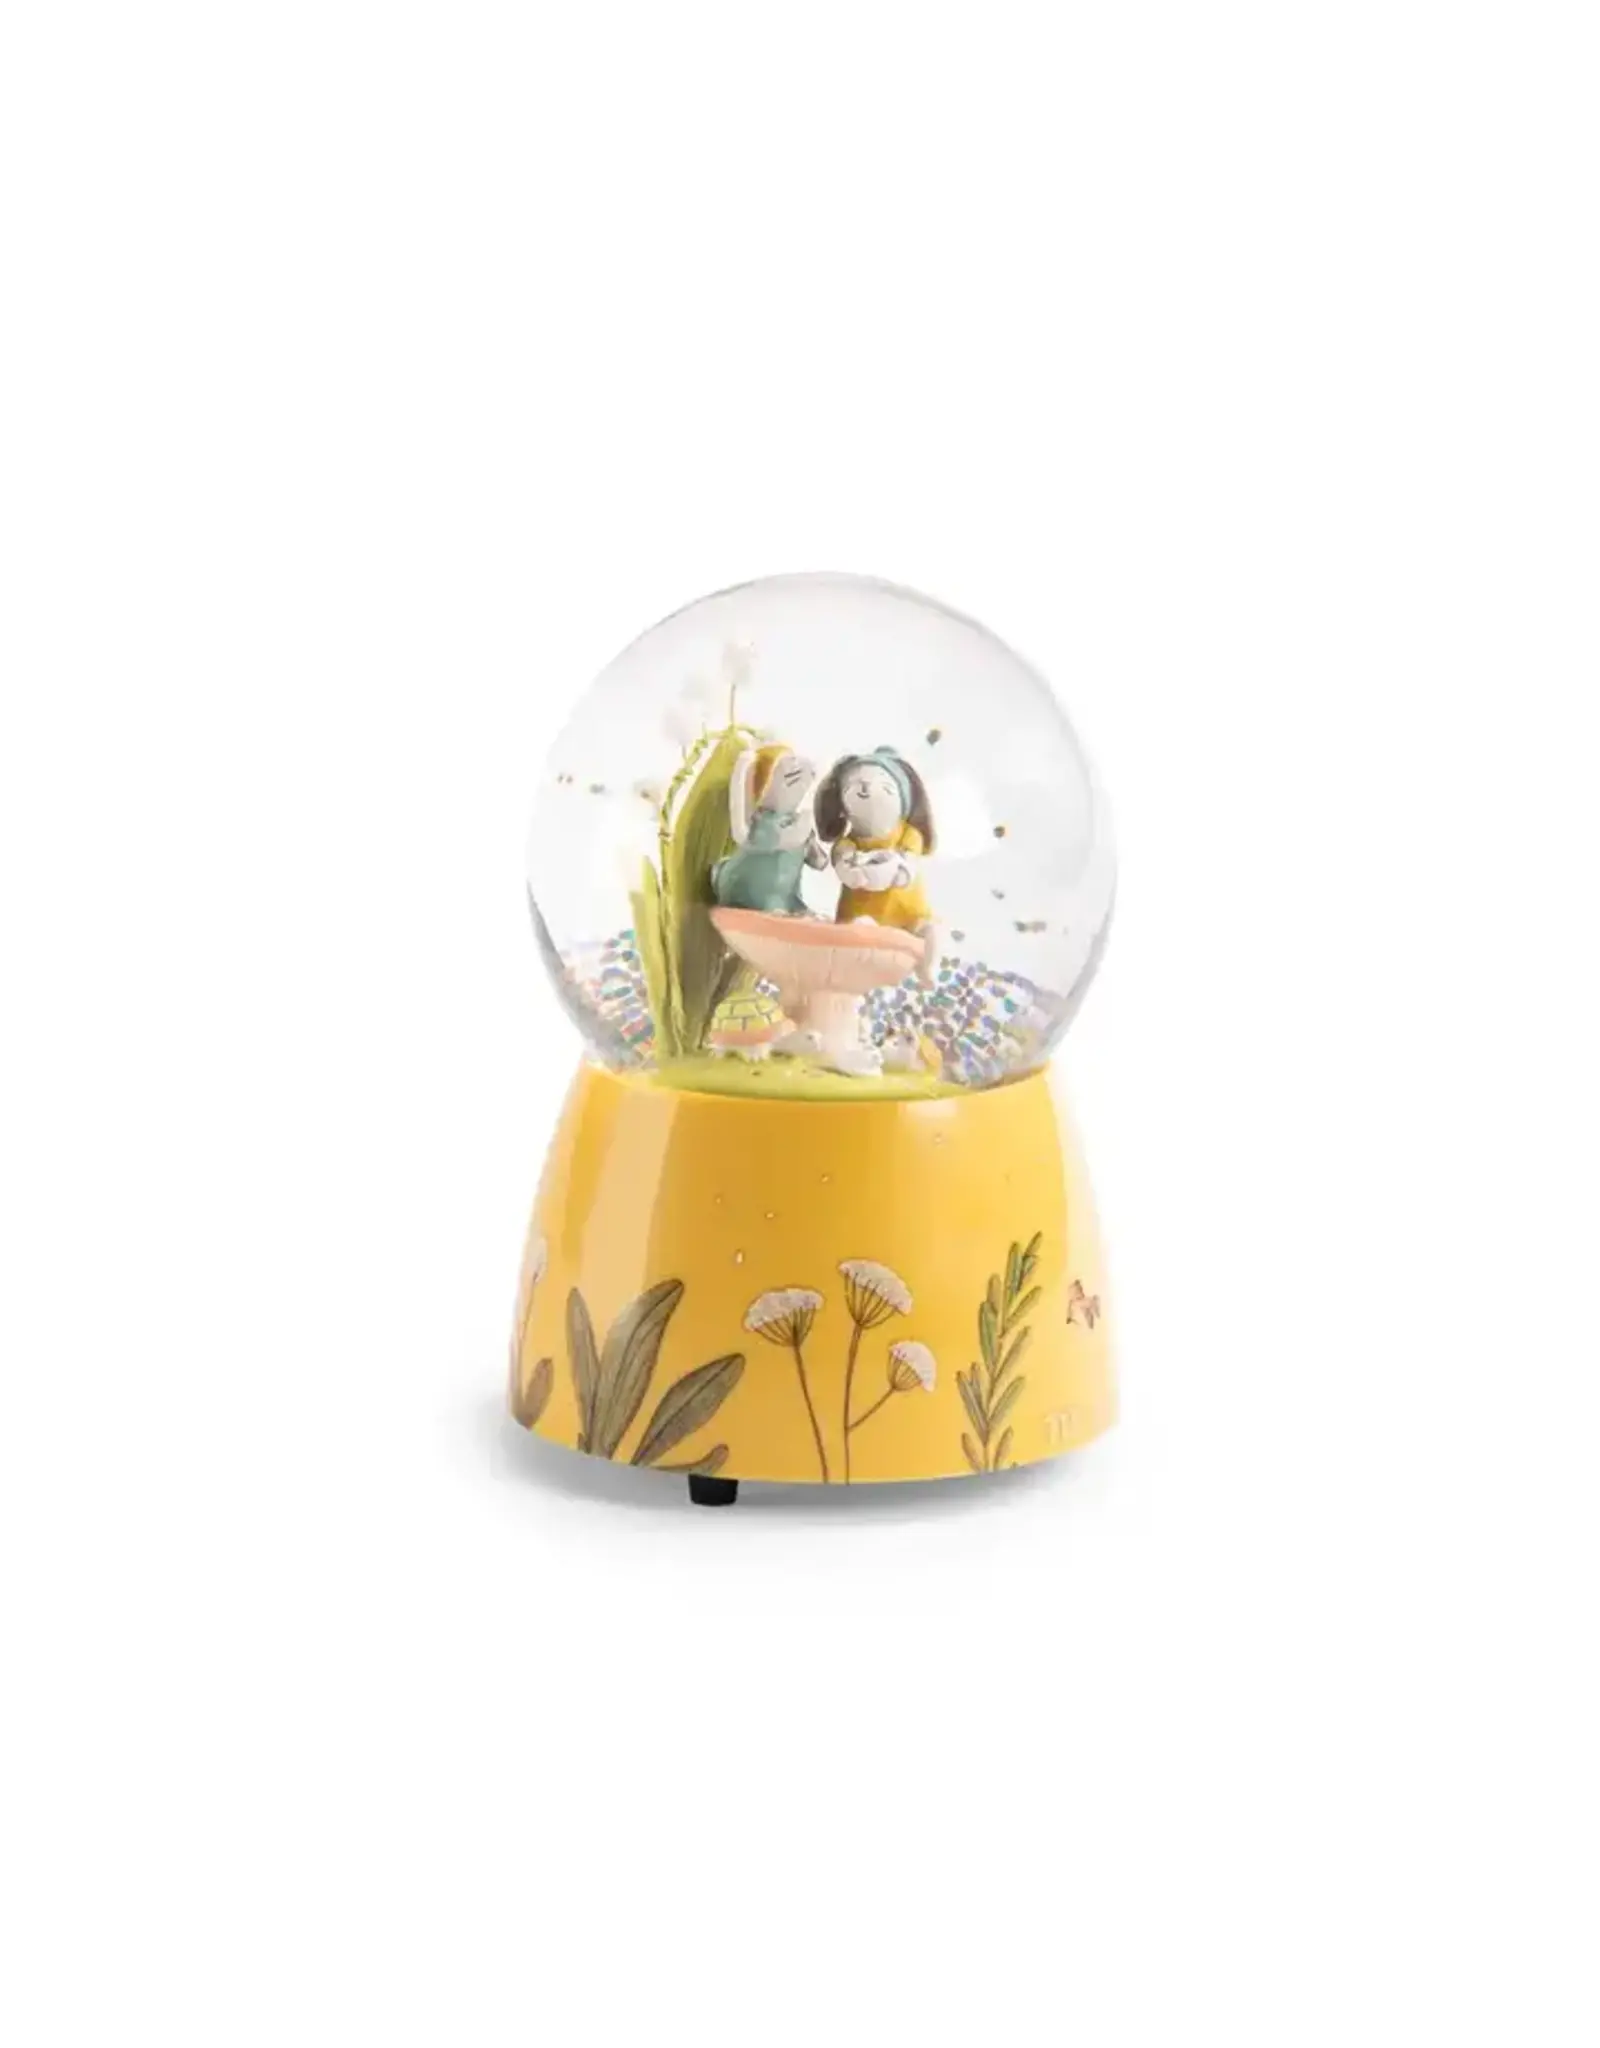 Moulin Roty Trois Petits Lapins Musical Snow Globe